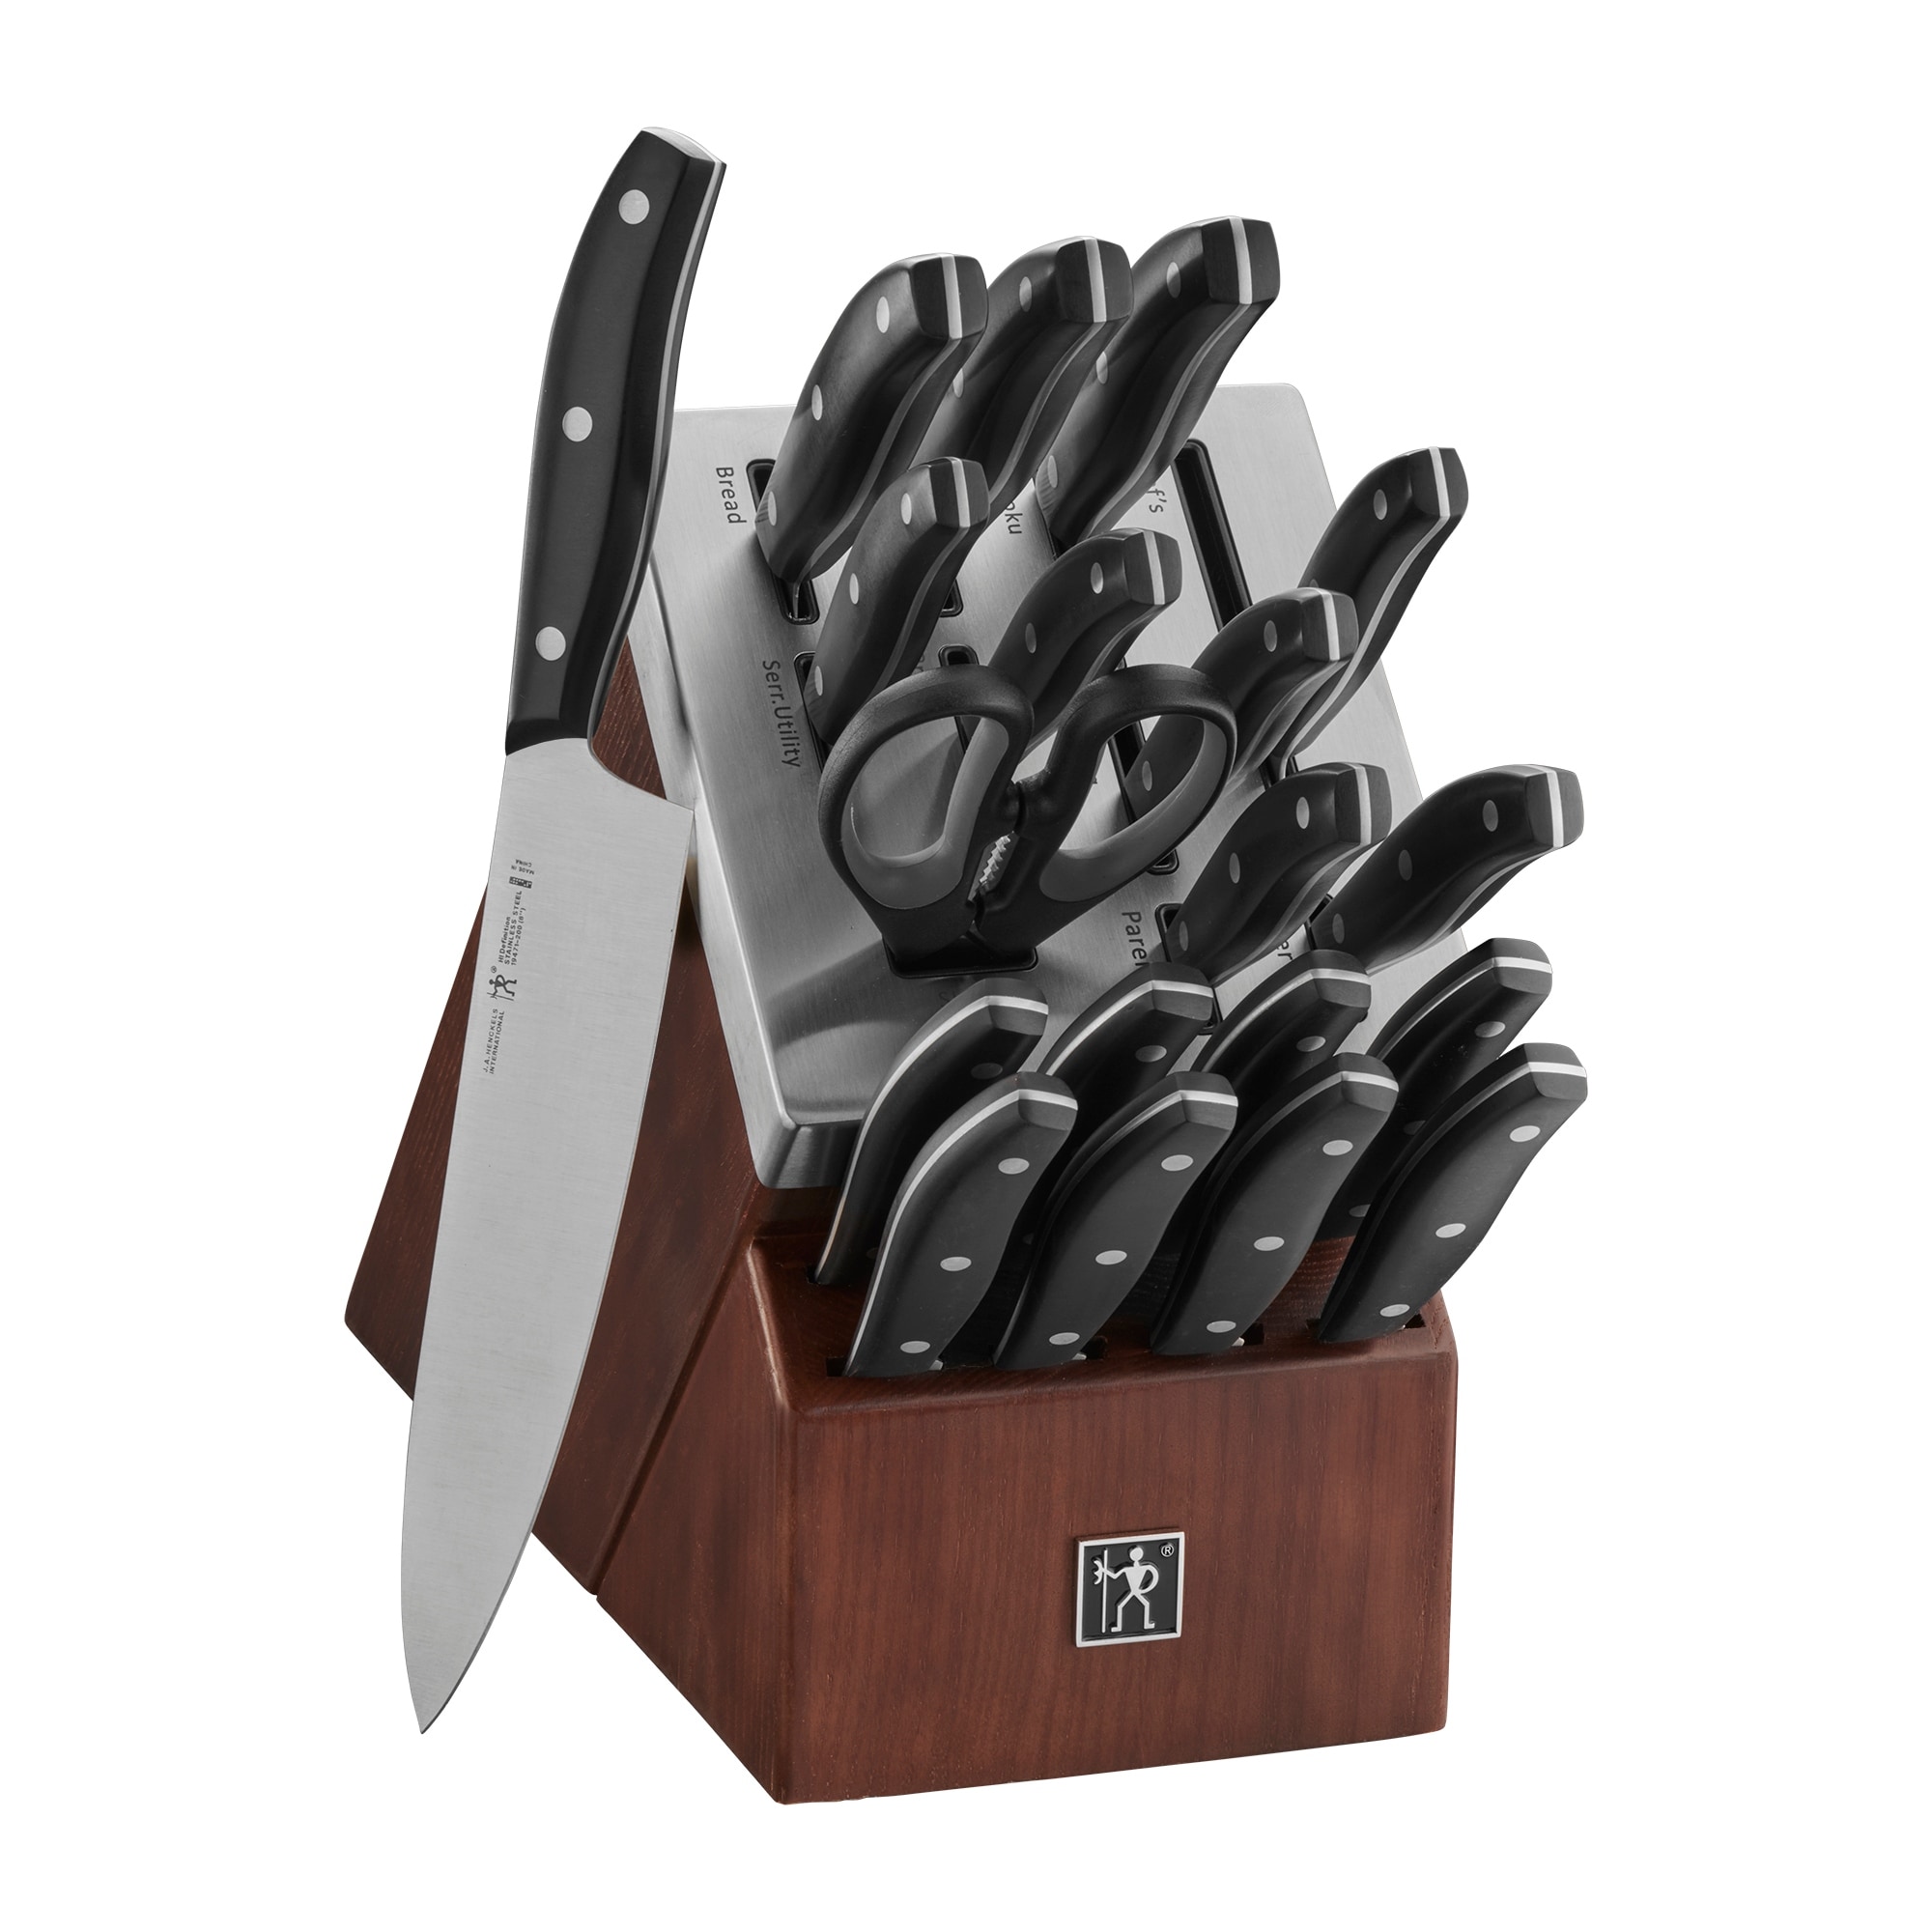 Berlinger Haus 6 Piece Kitchen Knife Set, Elegant Cooking Knives with  Kitchen Shears and Sharpener, Carbon